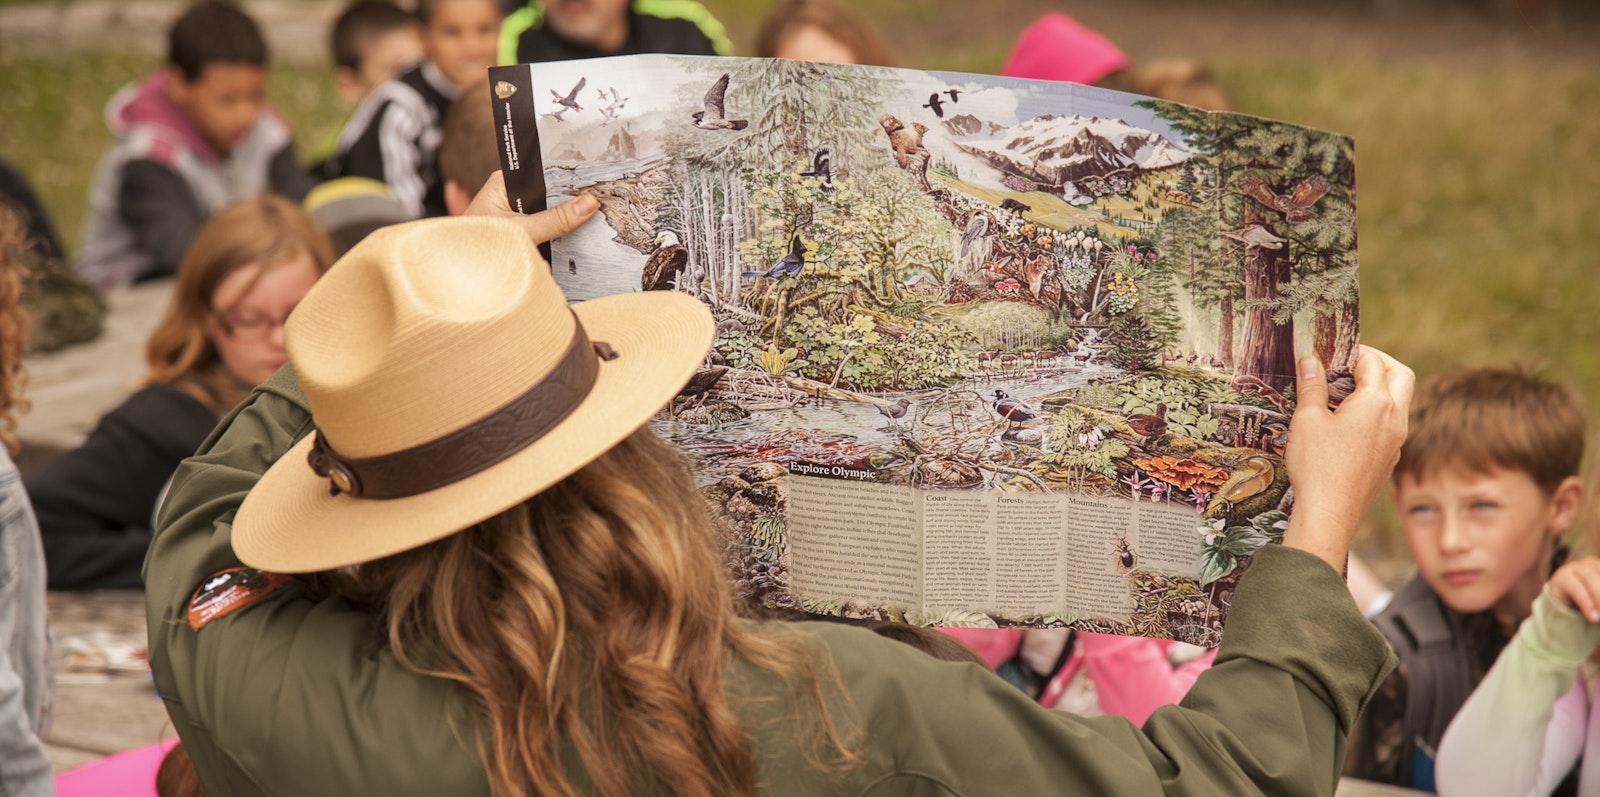 Students listen to a park ranger, who holds up a map to the group